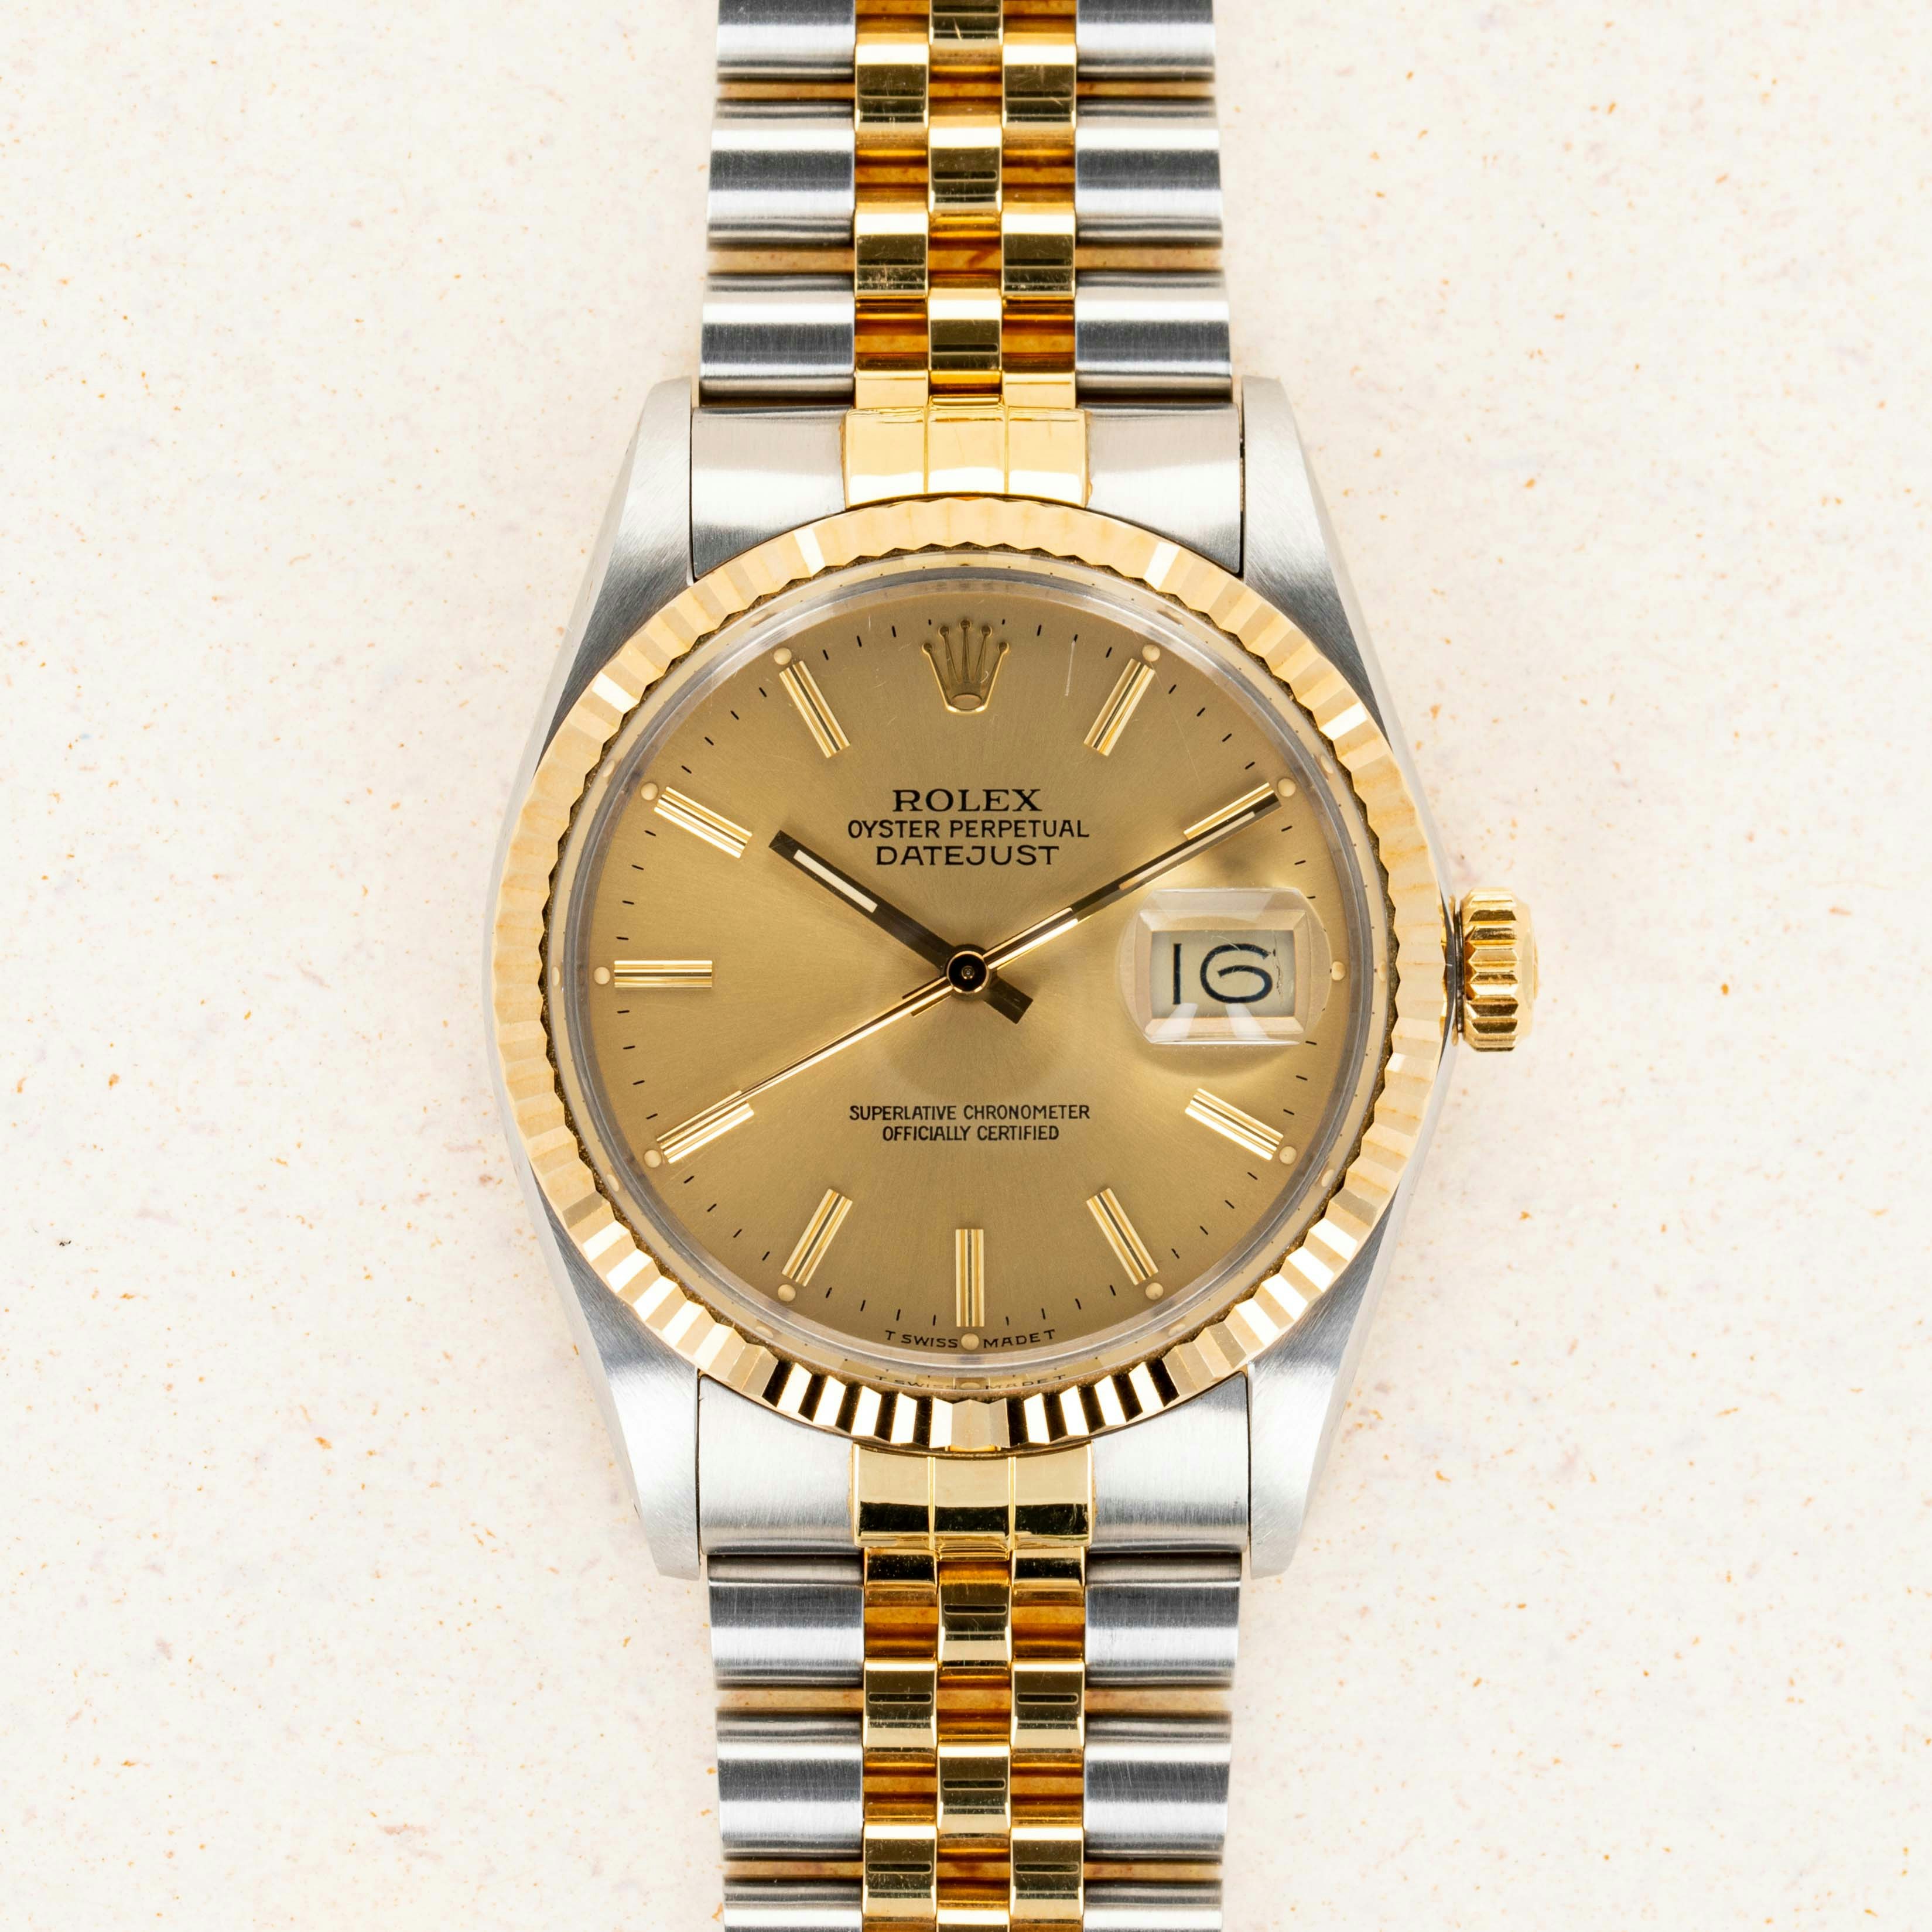 Thumbnail for Rolex Datejust 16013 Two-Tone 18k YG and Steel Box and Papers